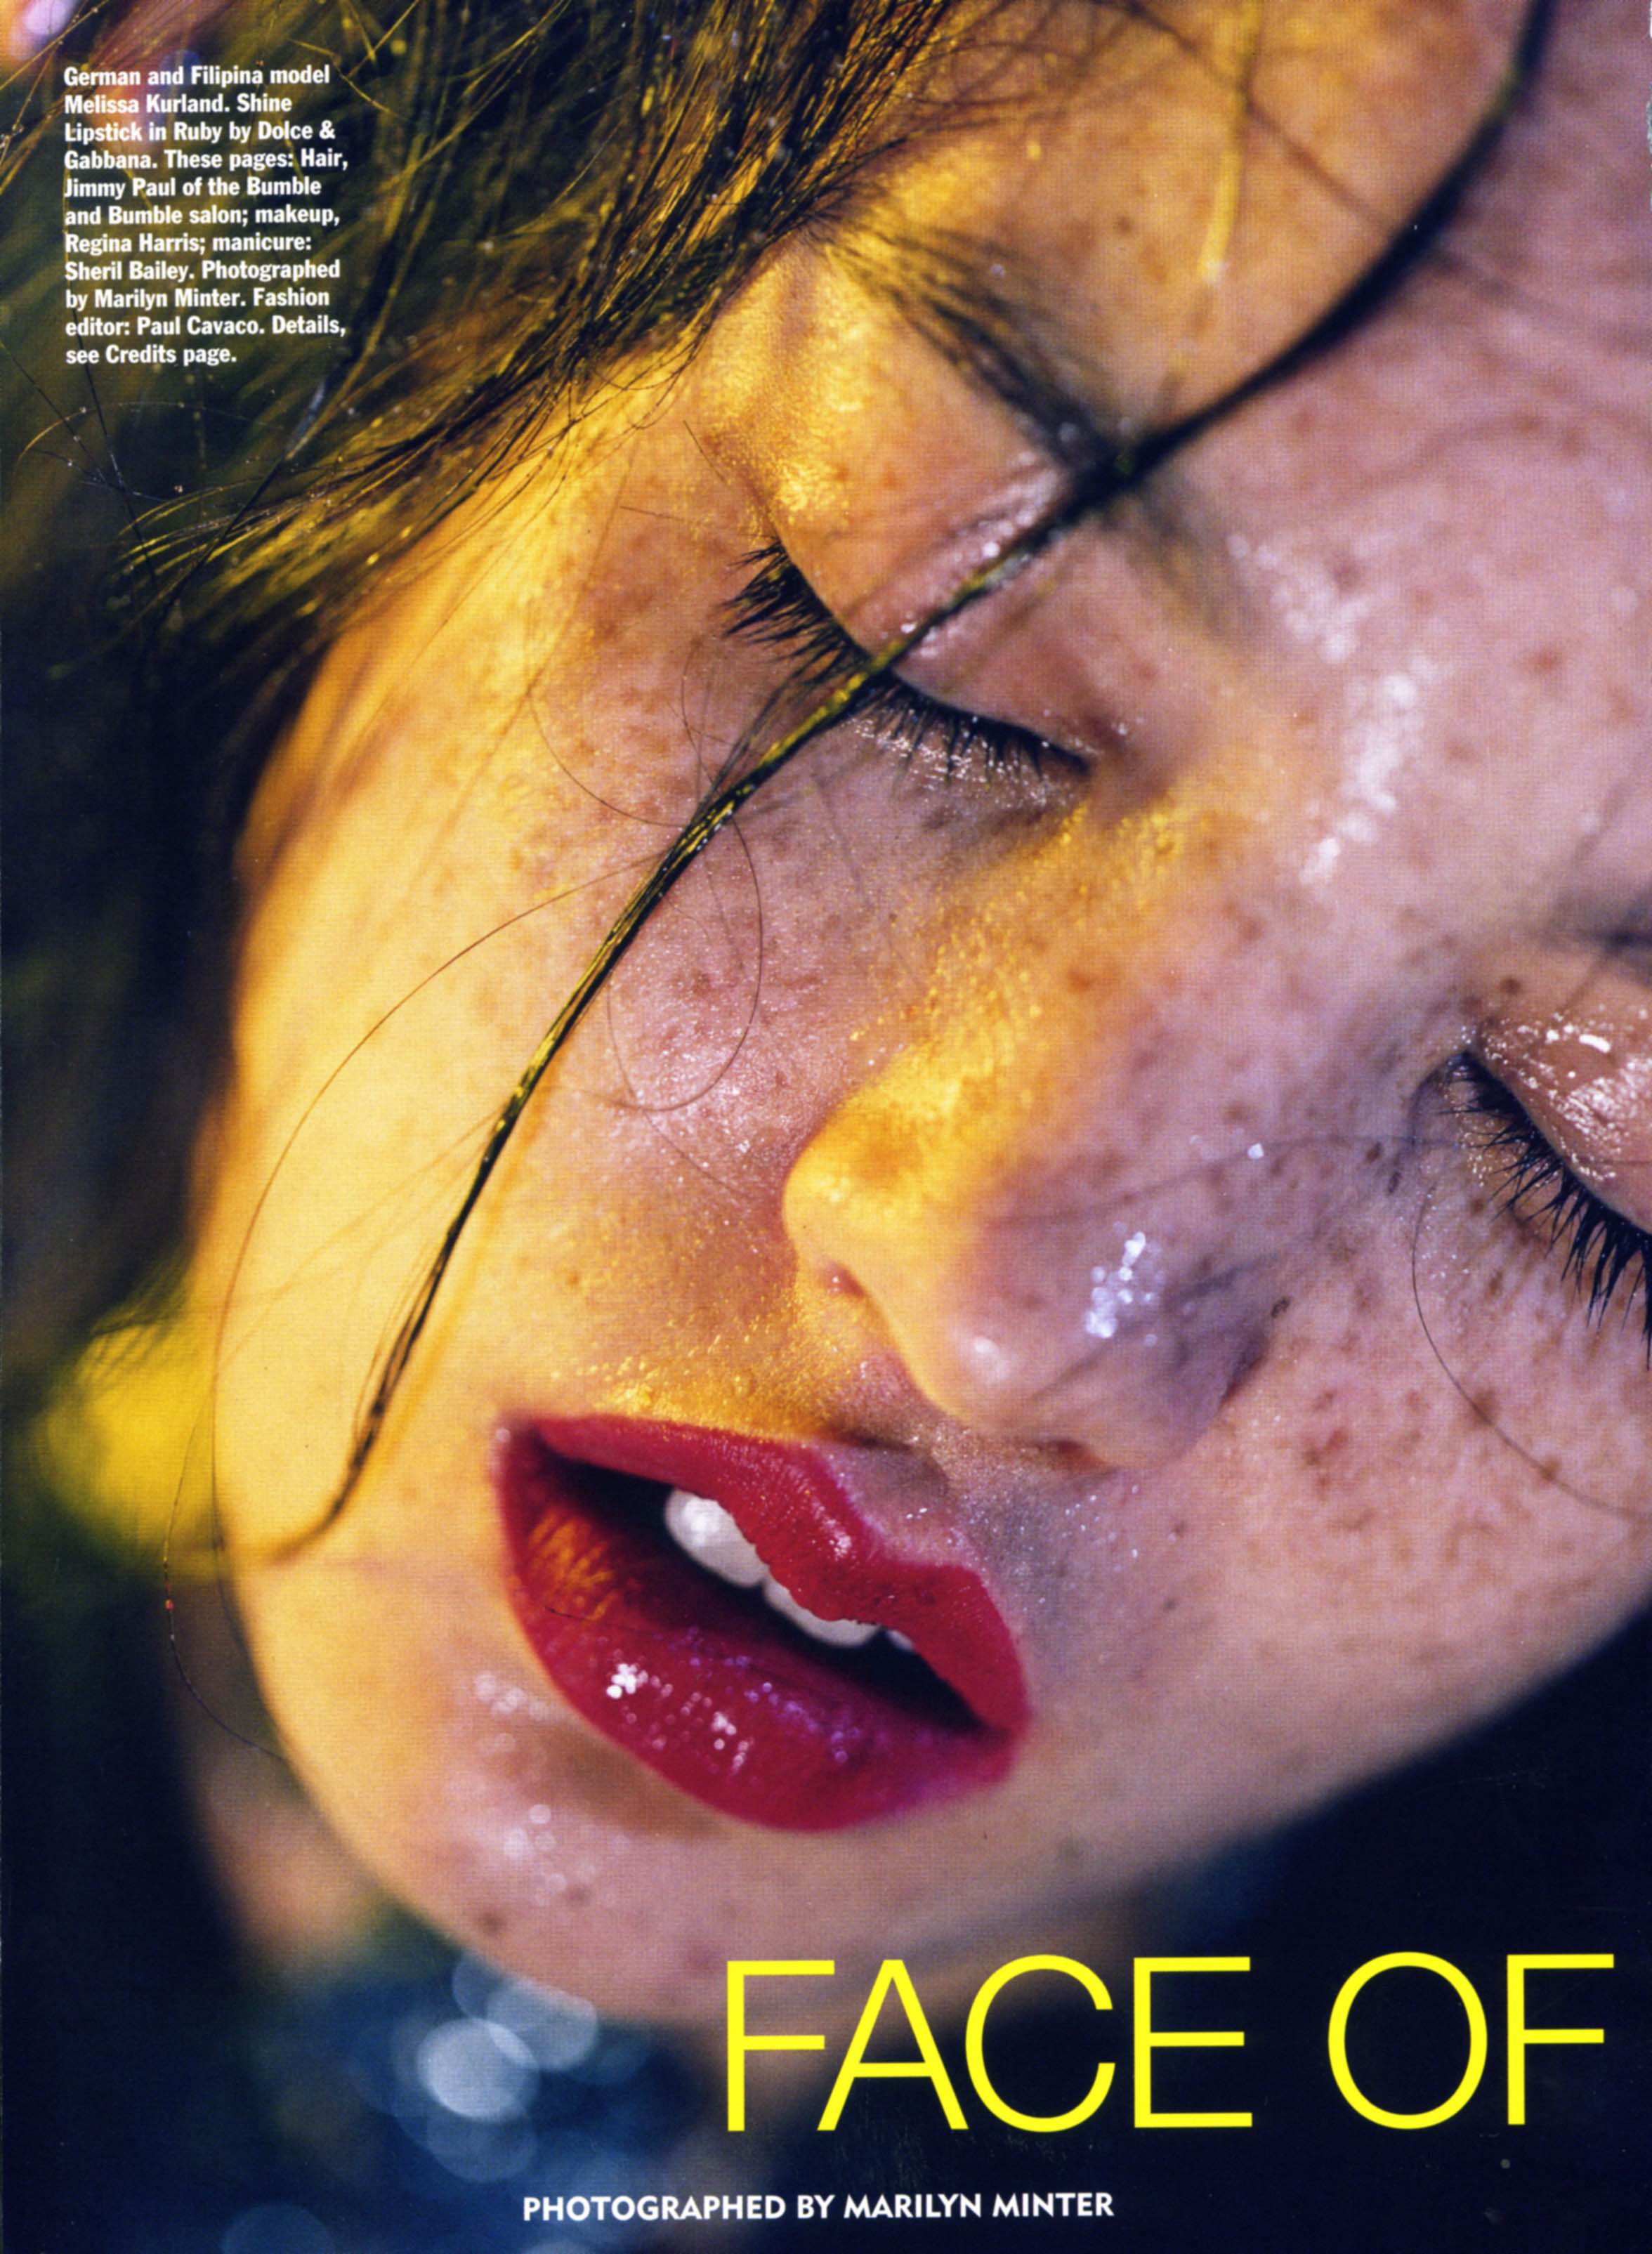 ALLURE MAGAZINE with MARILYN MINTER